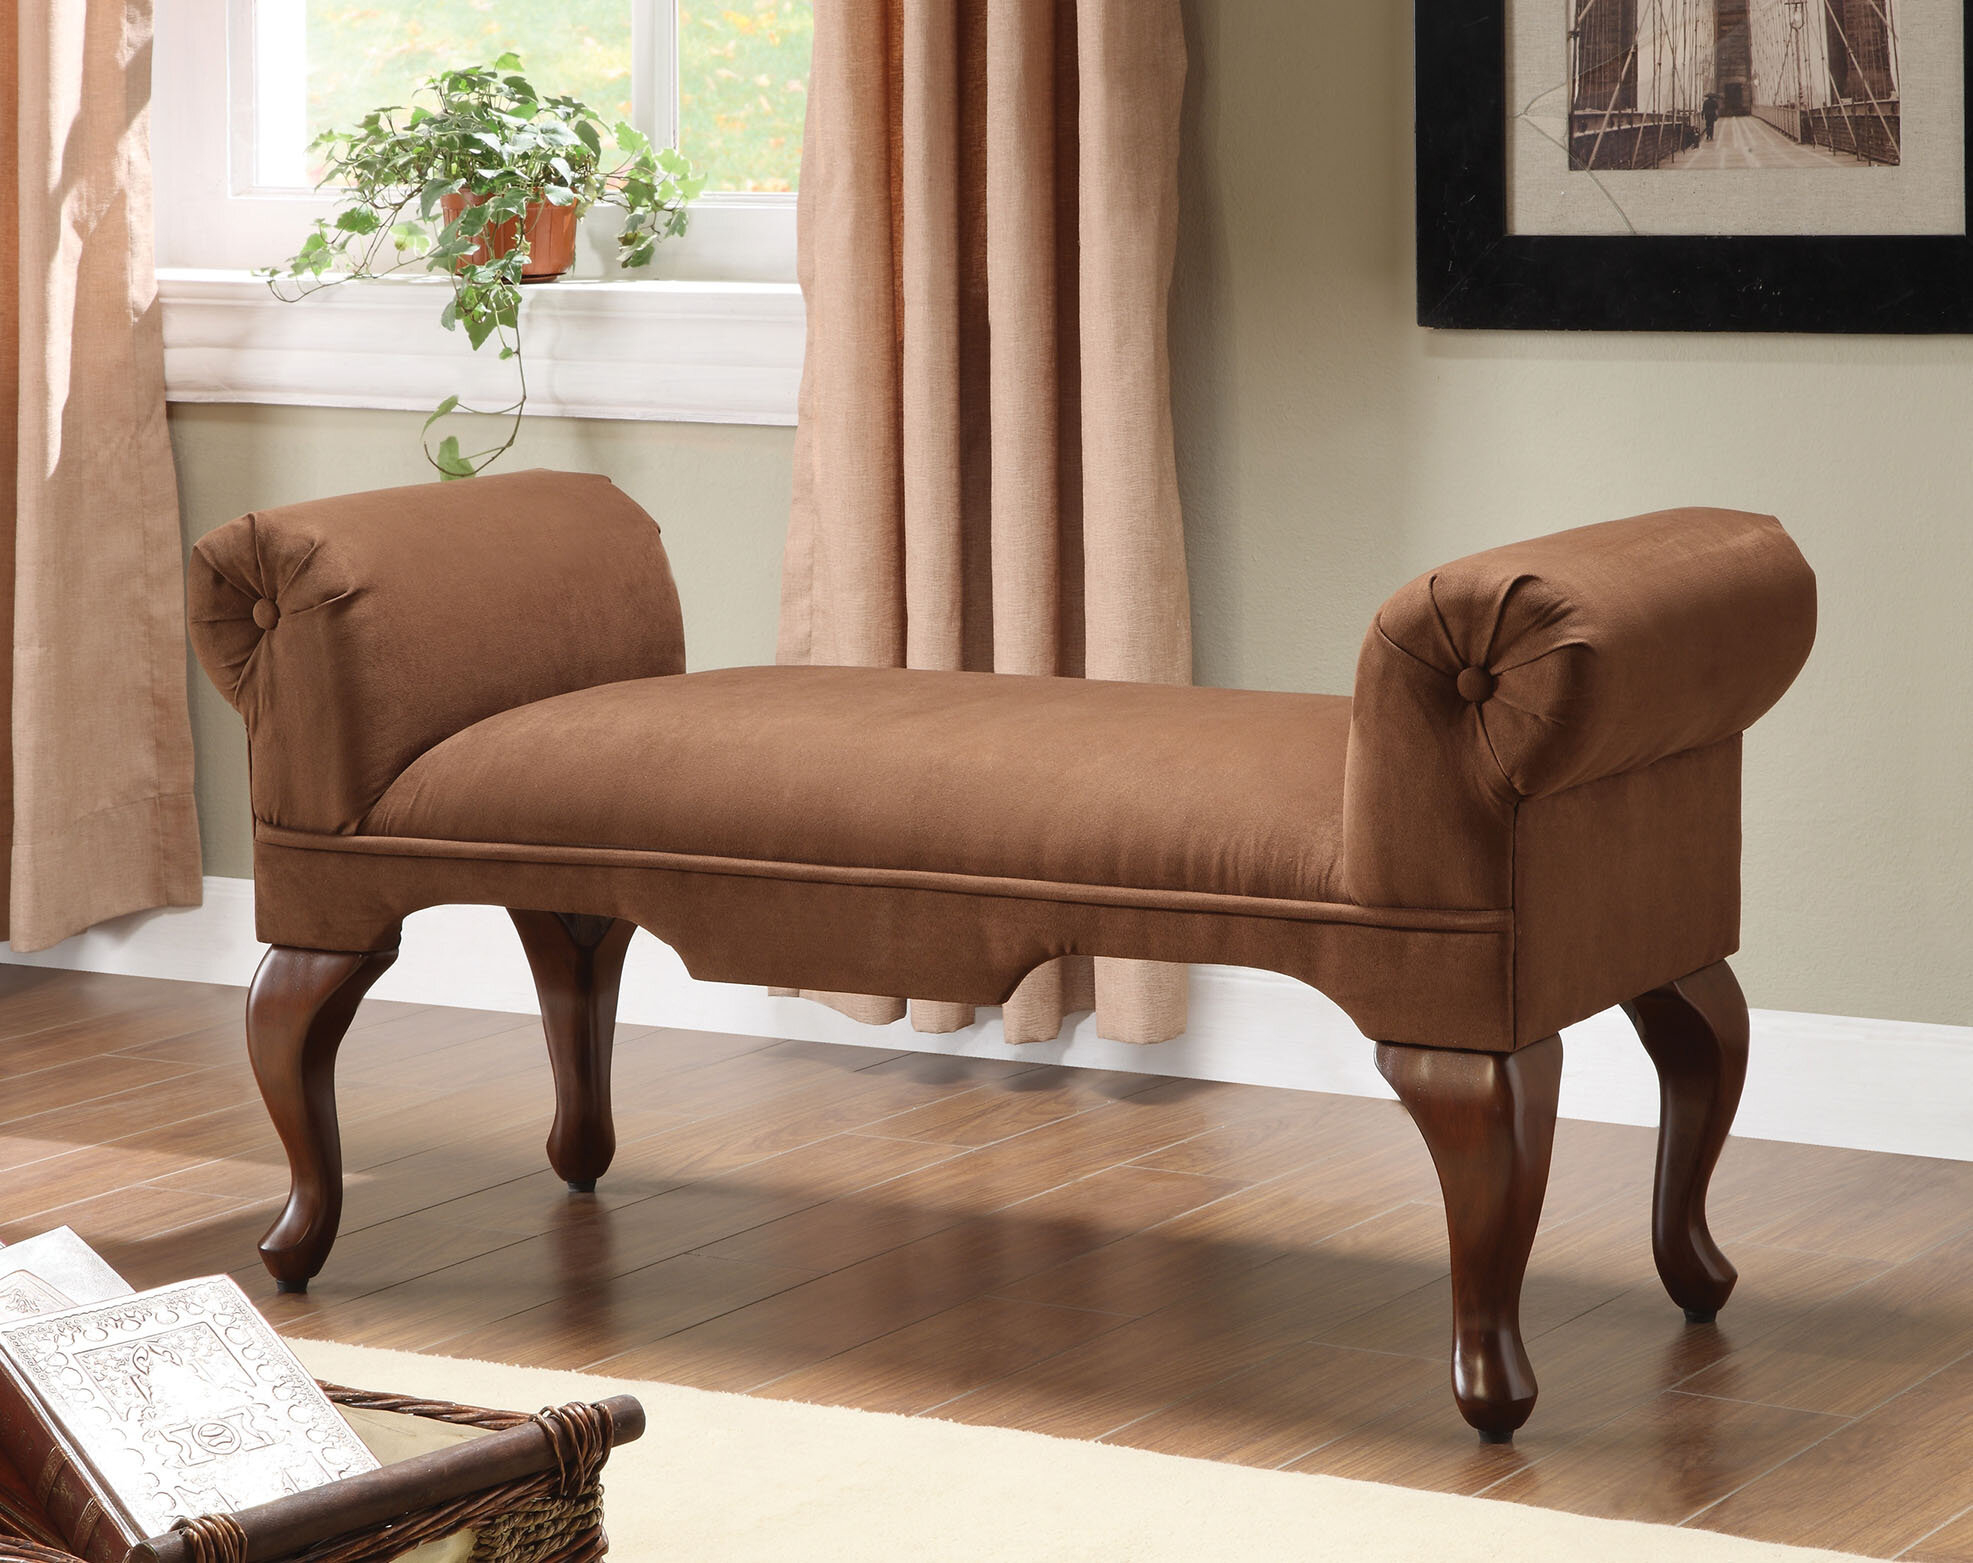 Style upholstered chocolate microfiber sitting bench with roll arm